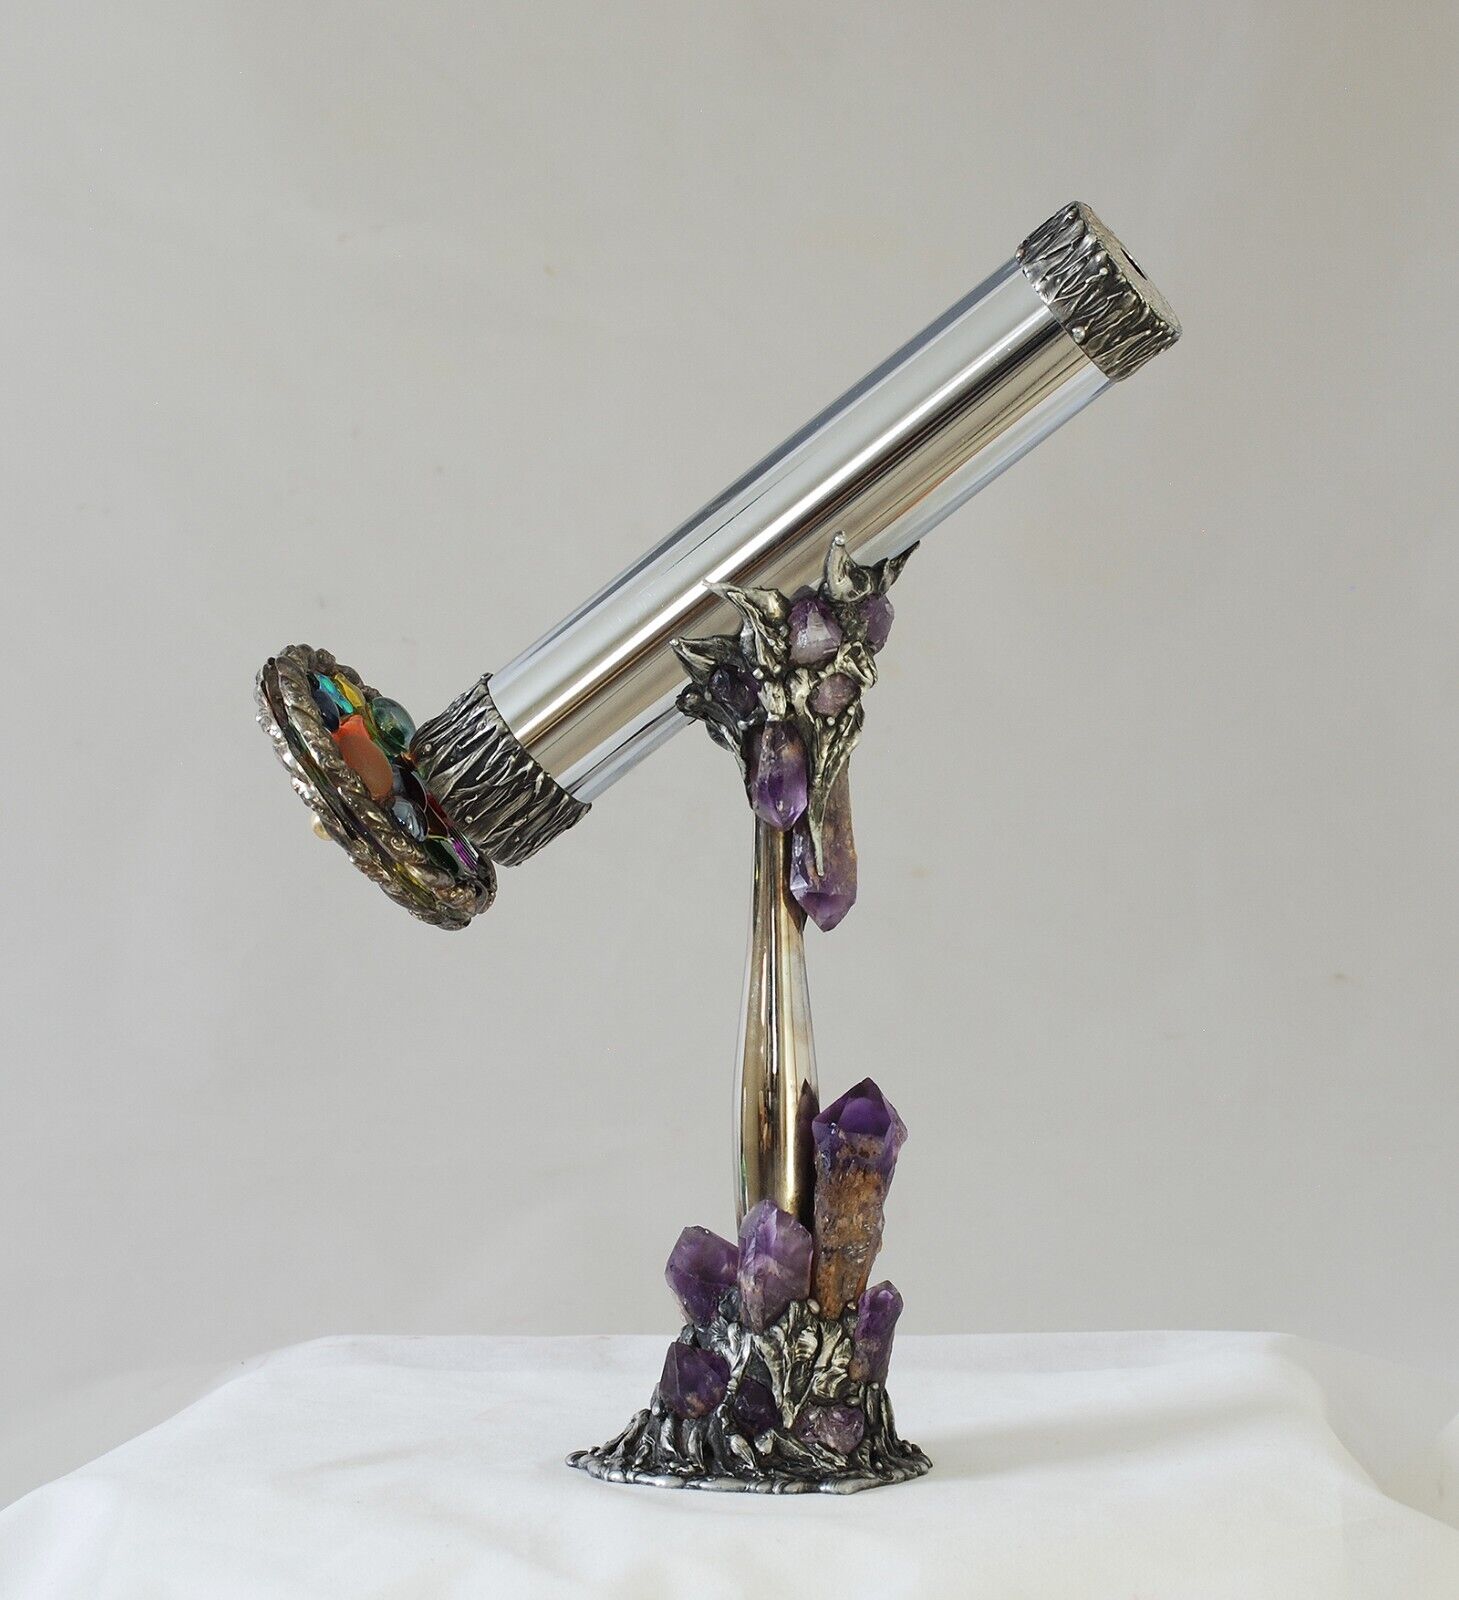  Parlor Kaleidoscope handcrafted by artist Darlene Musser silver plated scope